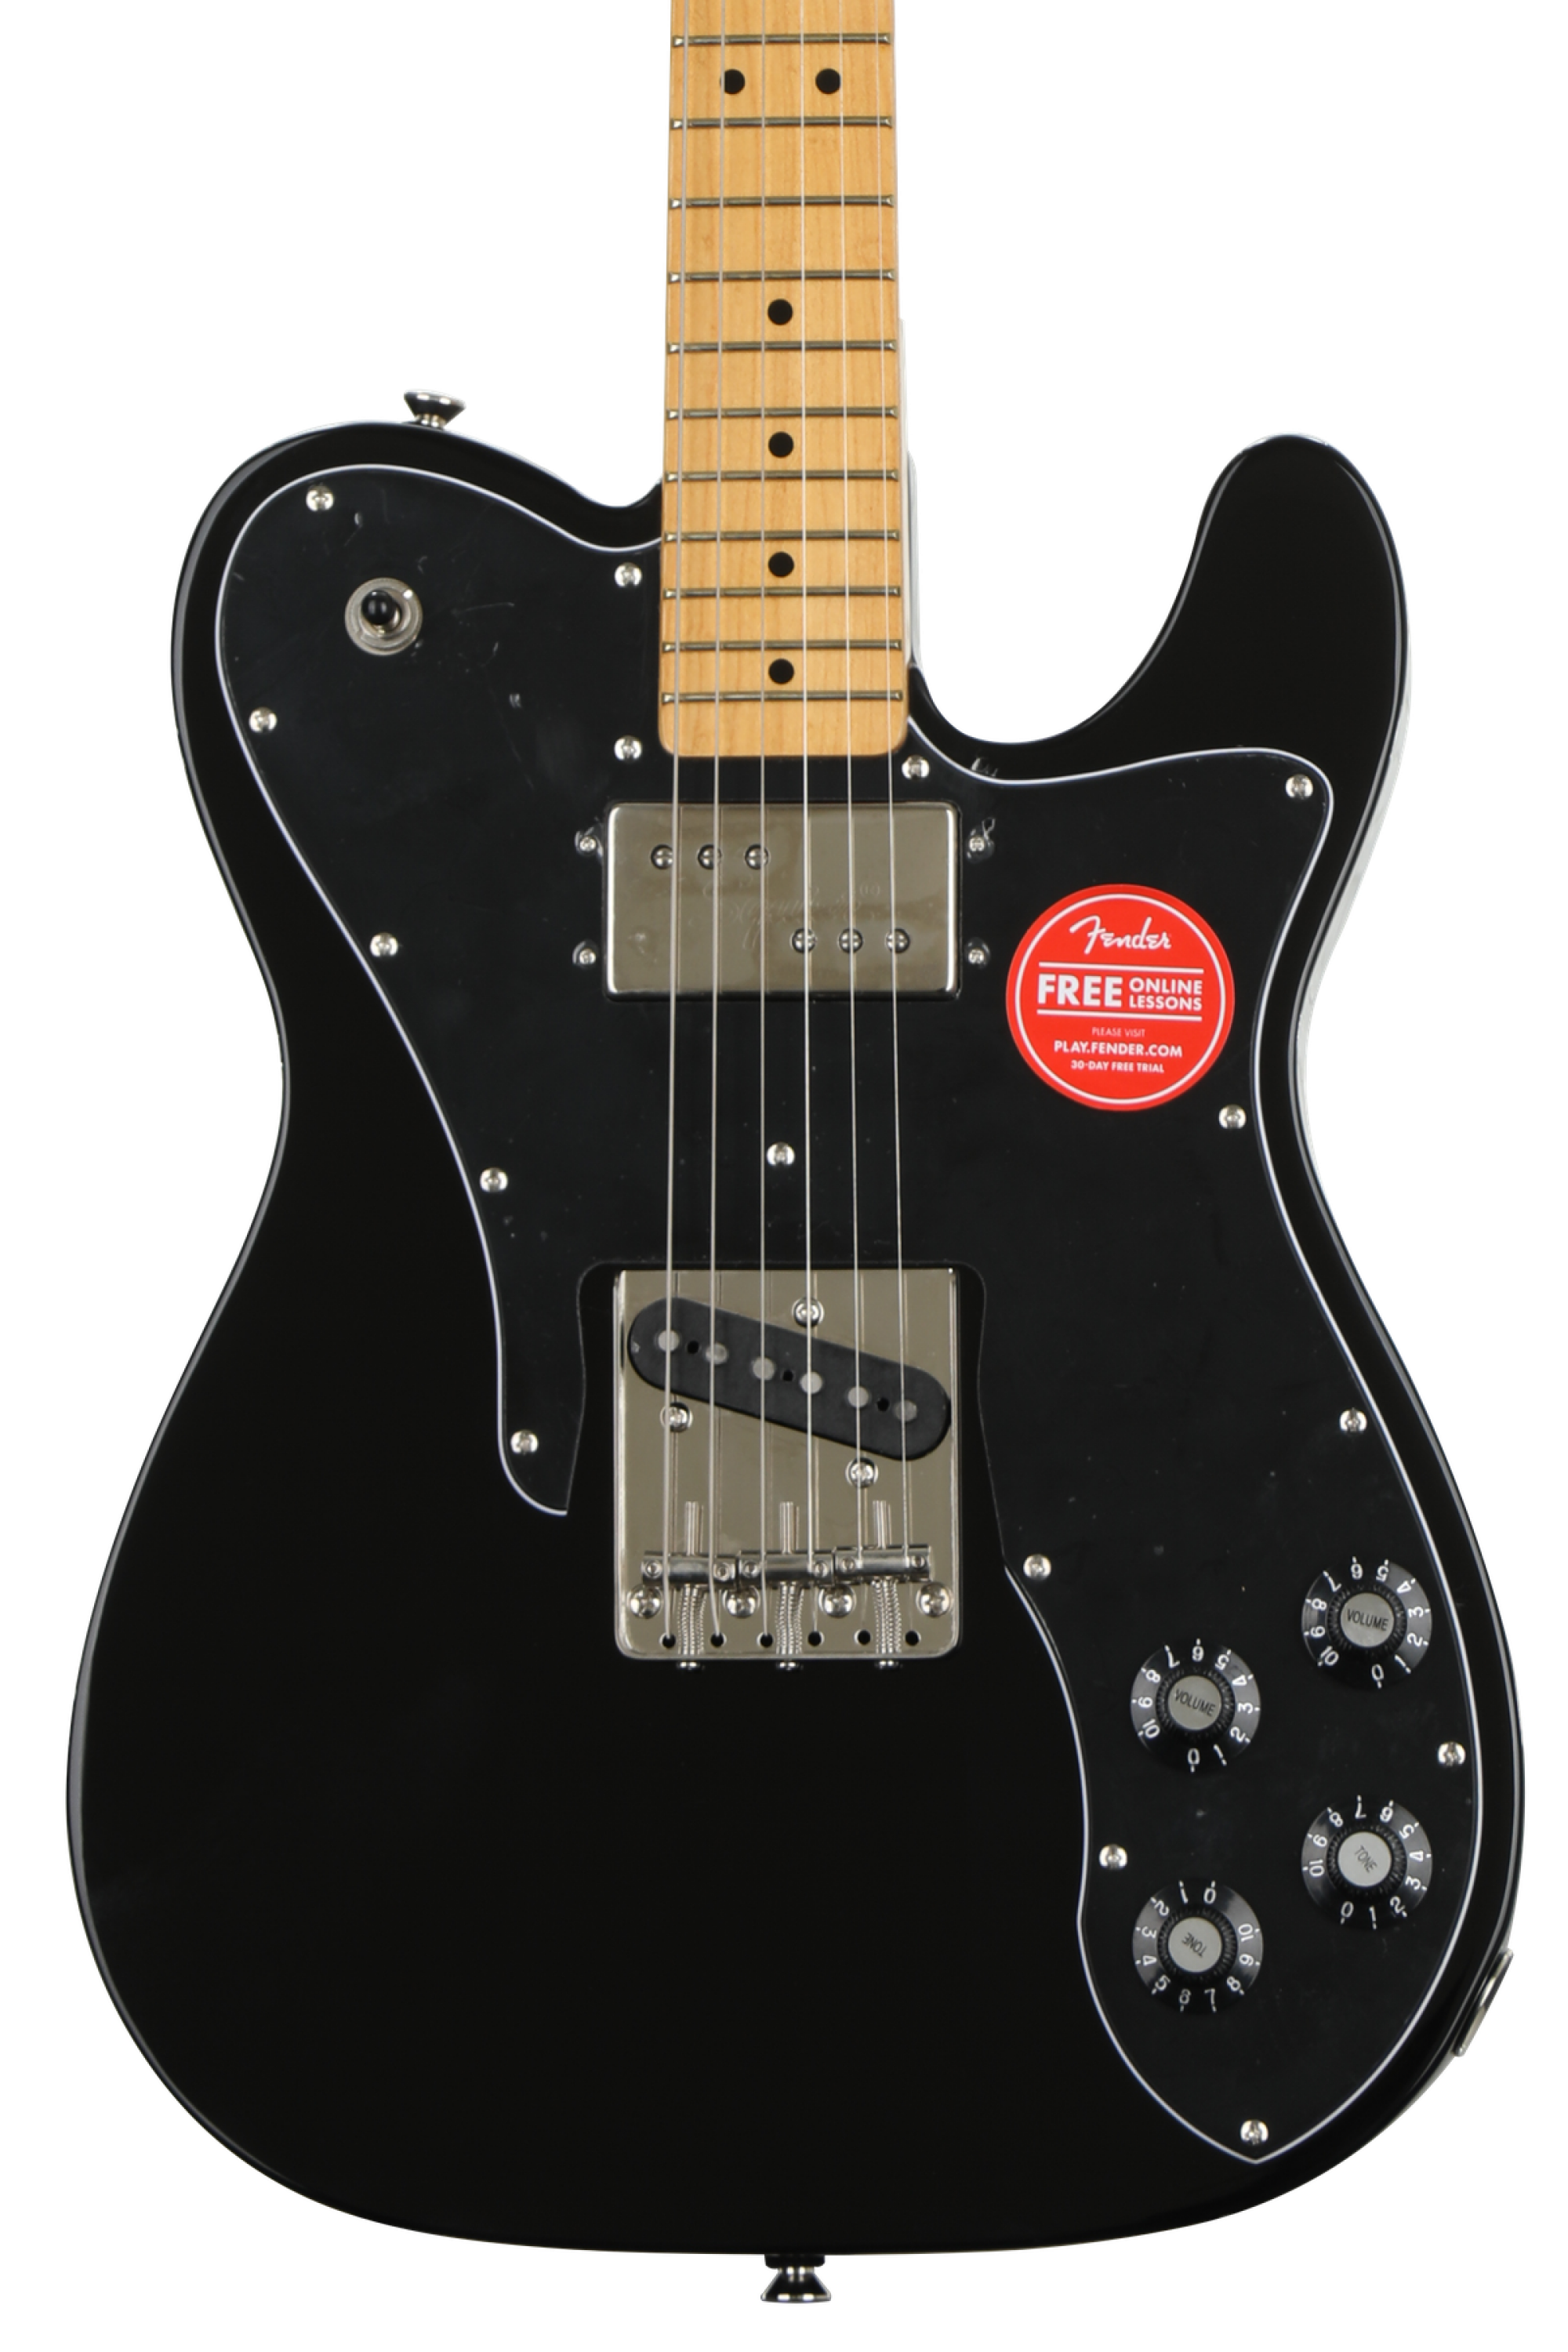 Squier Classic Vibe '70s Telecaster Custom - Black | Sweetwater